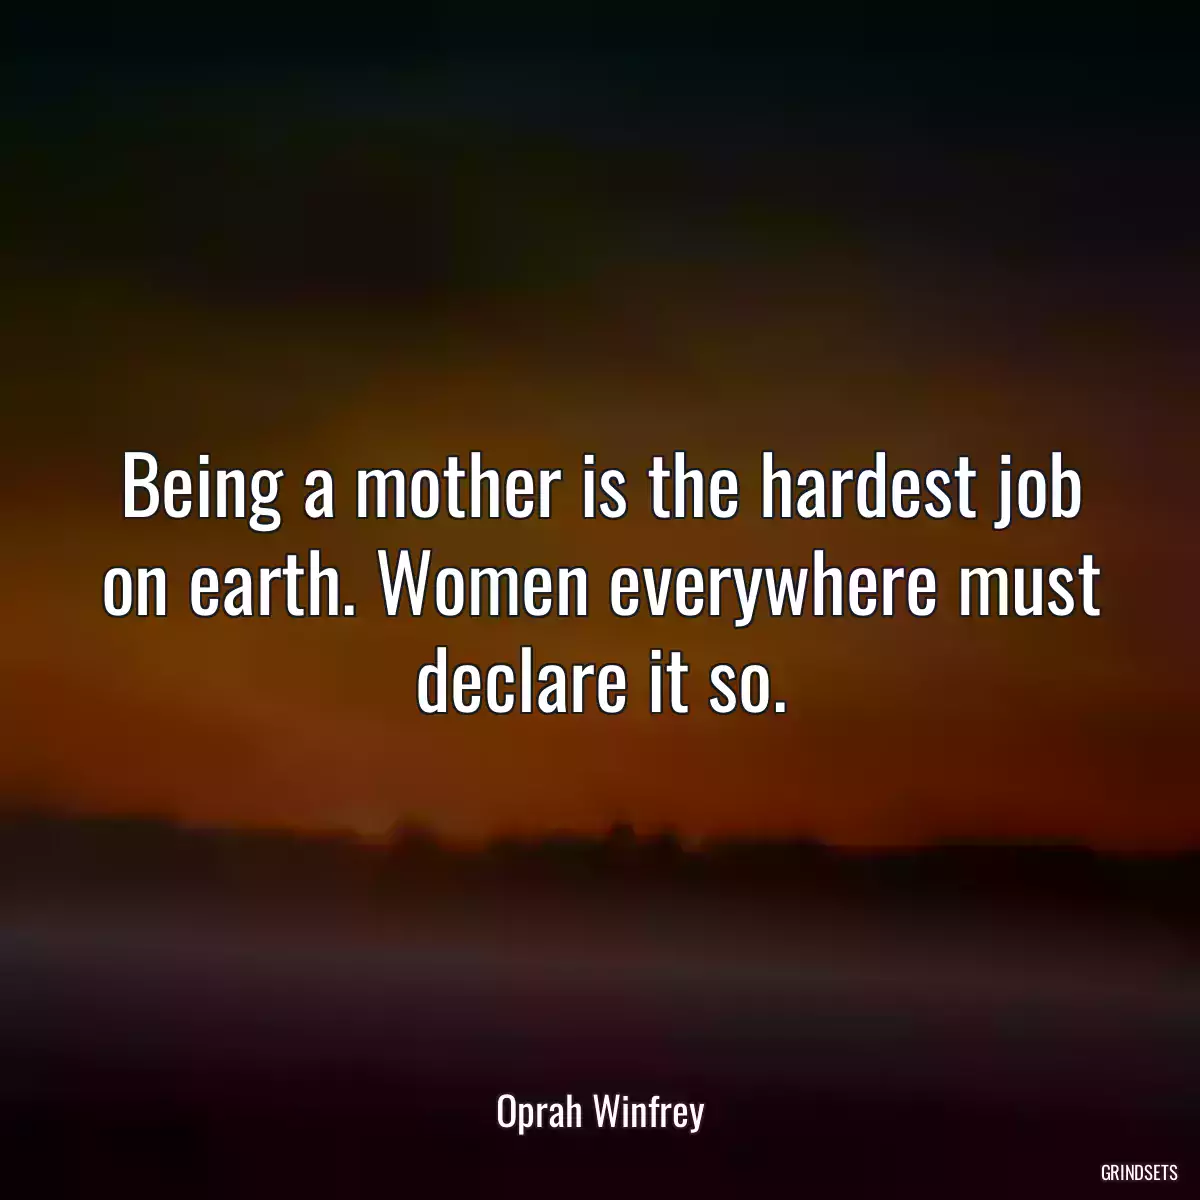 Being a mother is the hardest job on earth. Women everywhere must declare it so.